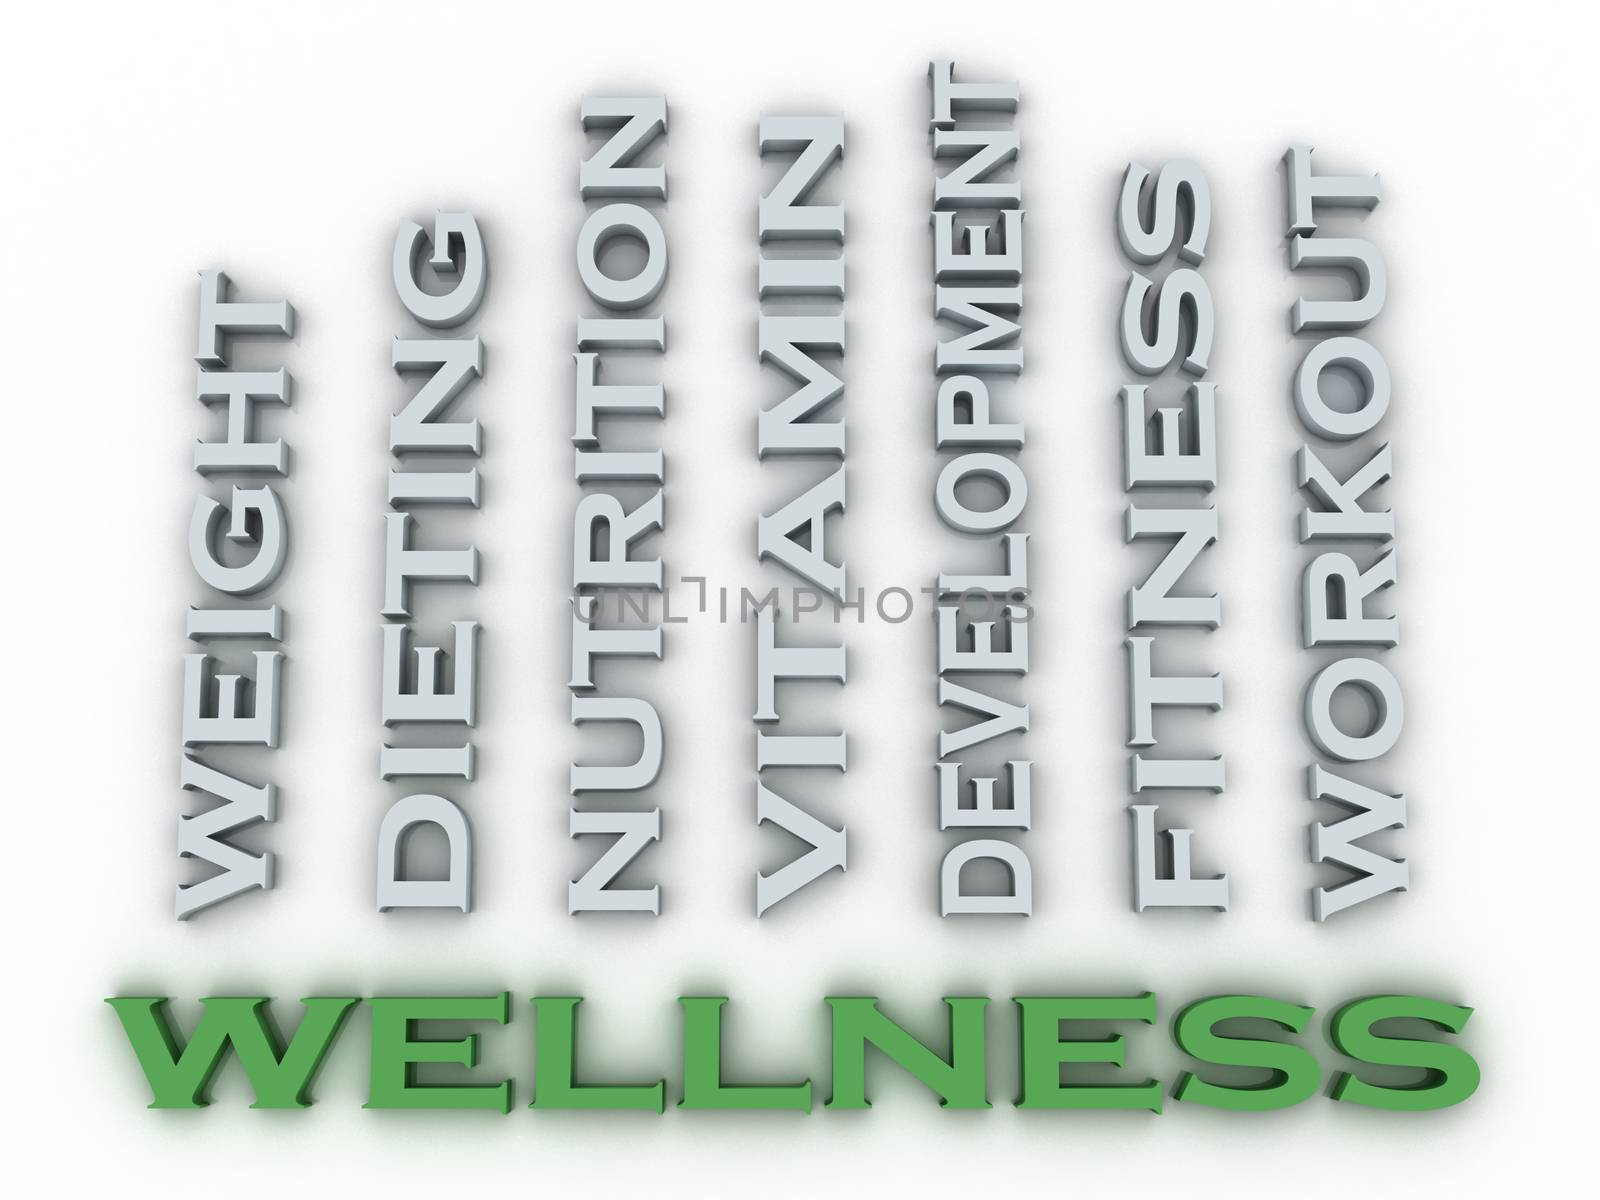 3d image Wellness issues concept word cloud background by dacasdo